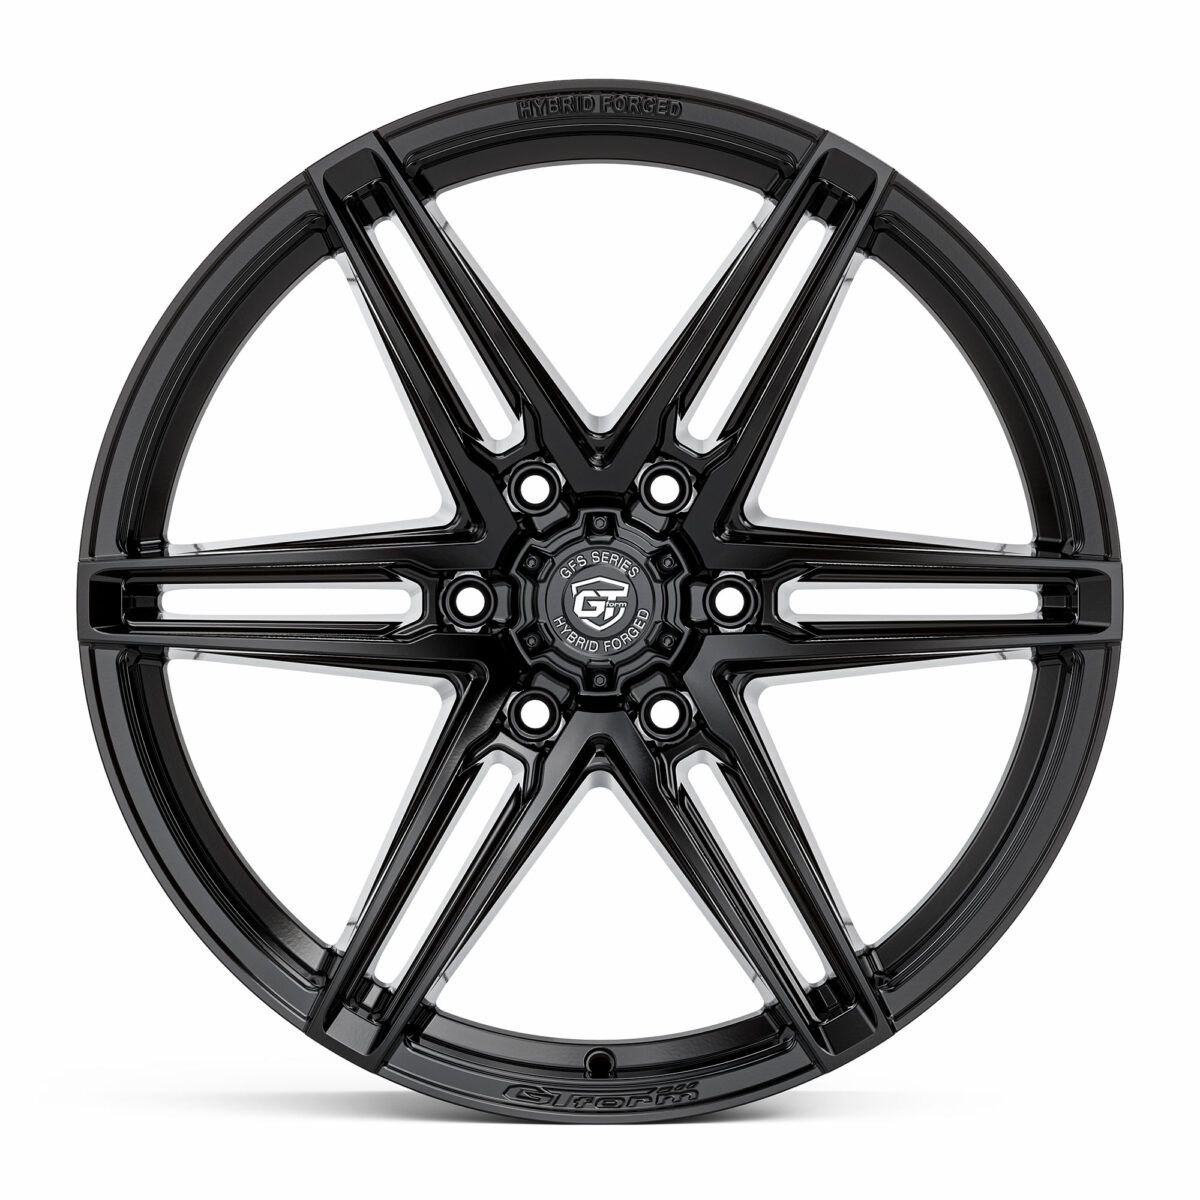 4X4 WHEELS GT FORM GFS2 HYBRID FORGED GLOSS BLACK 20 INCH OFFROAD RIMS FOR 4WD SUV